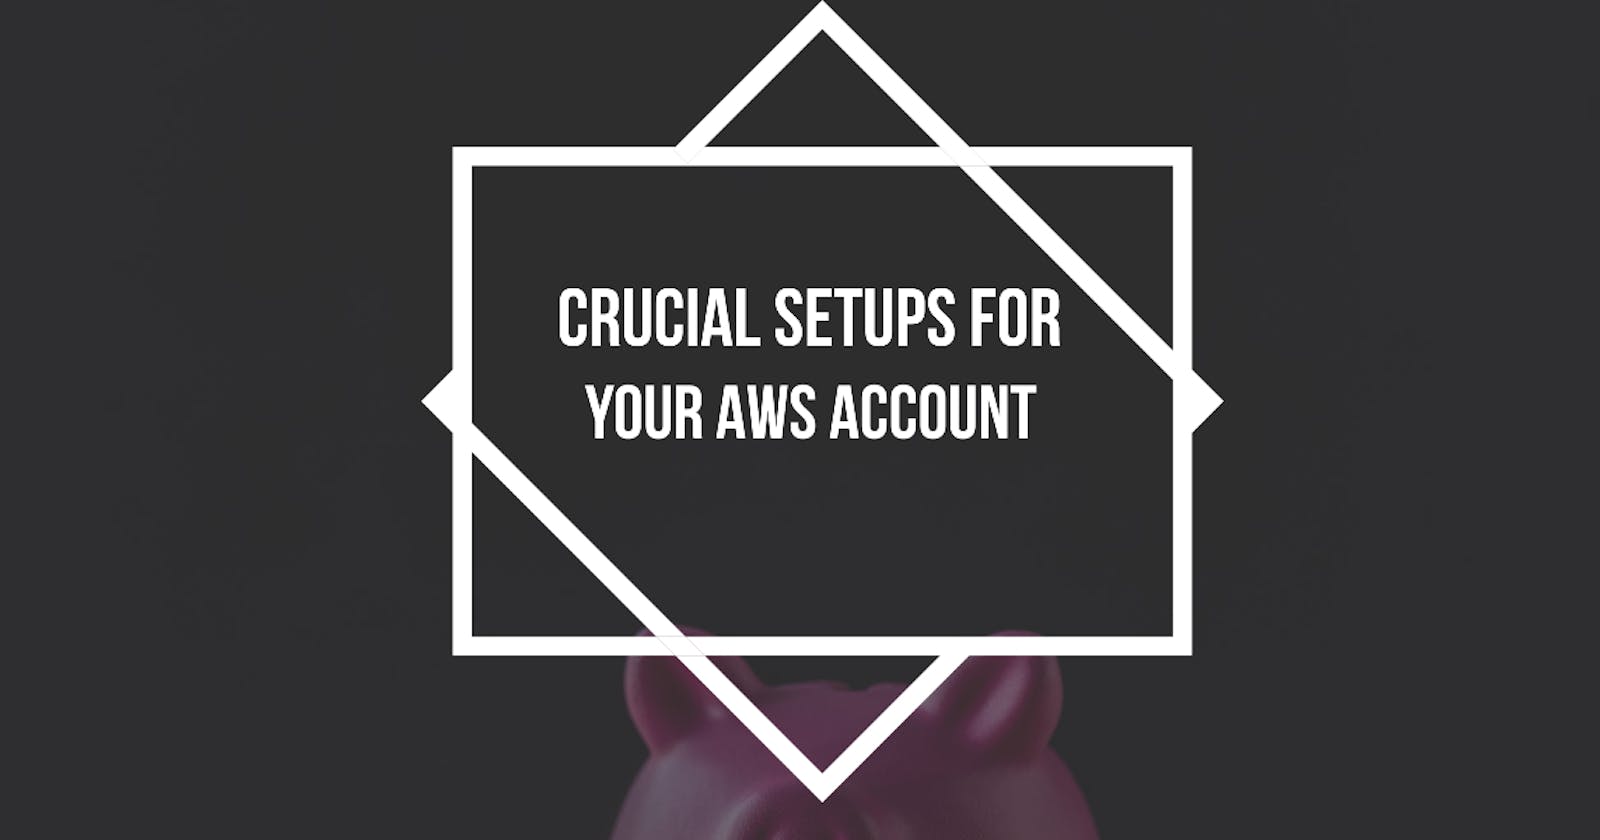 Four Crucial Setup you need to make in your New AWS Account